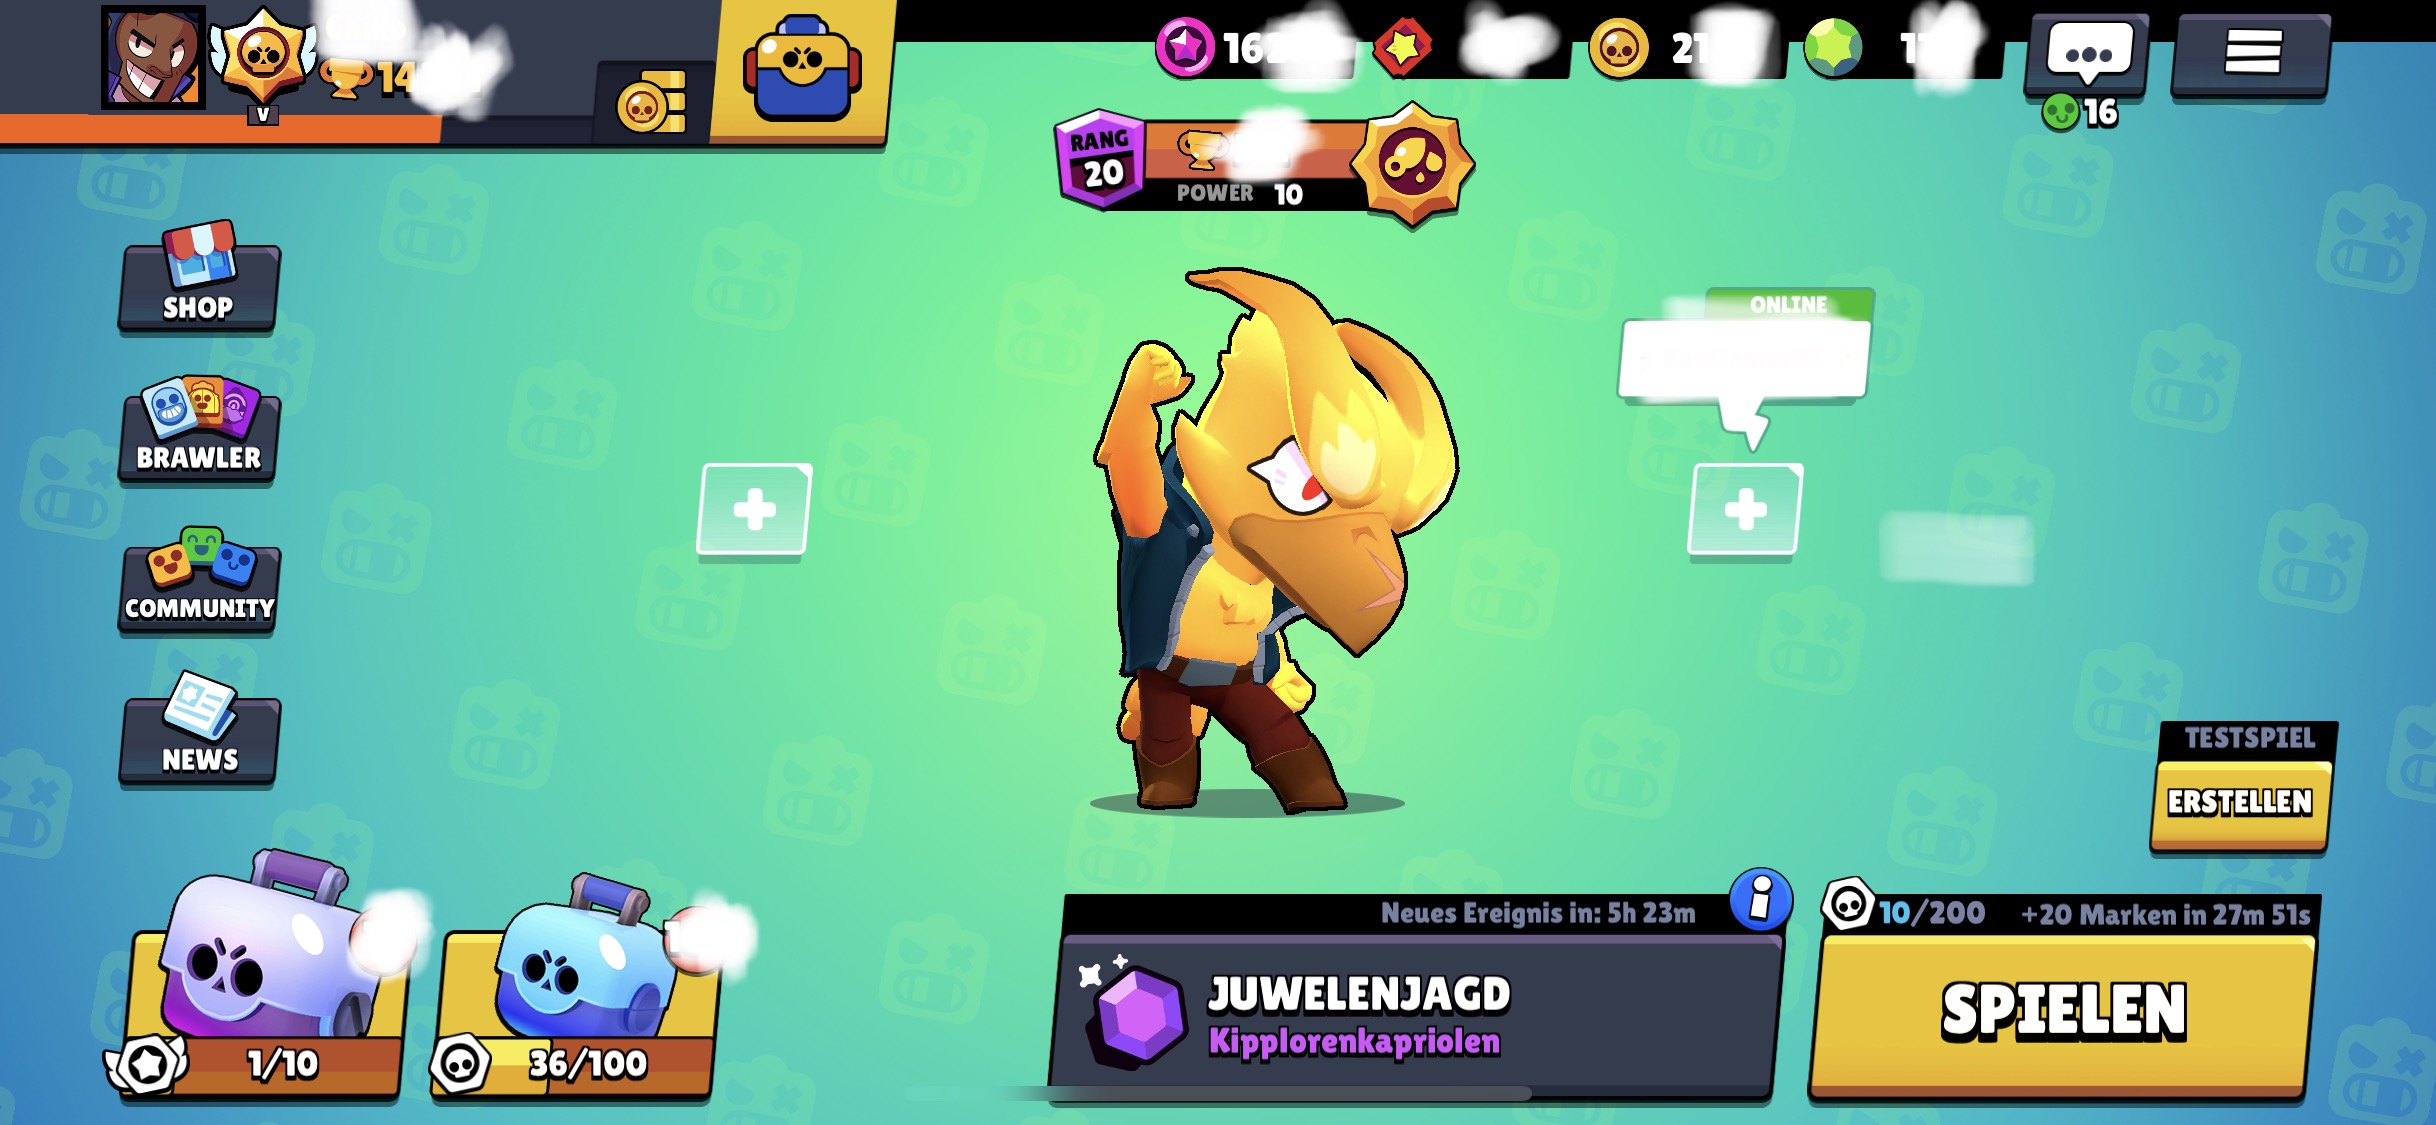 Brawl Stars Max Account With 14800 Trophies And Over 16000 Starpoints Epicnpc Marketplace - brawl stars maxed out account